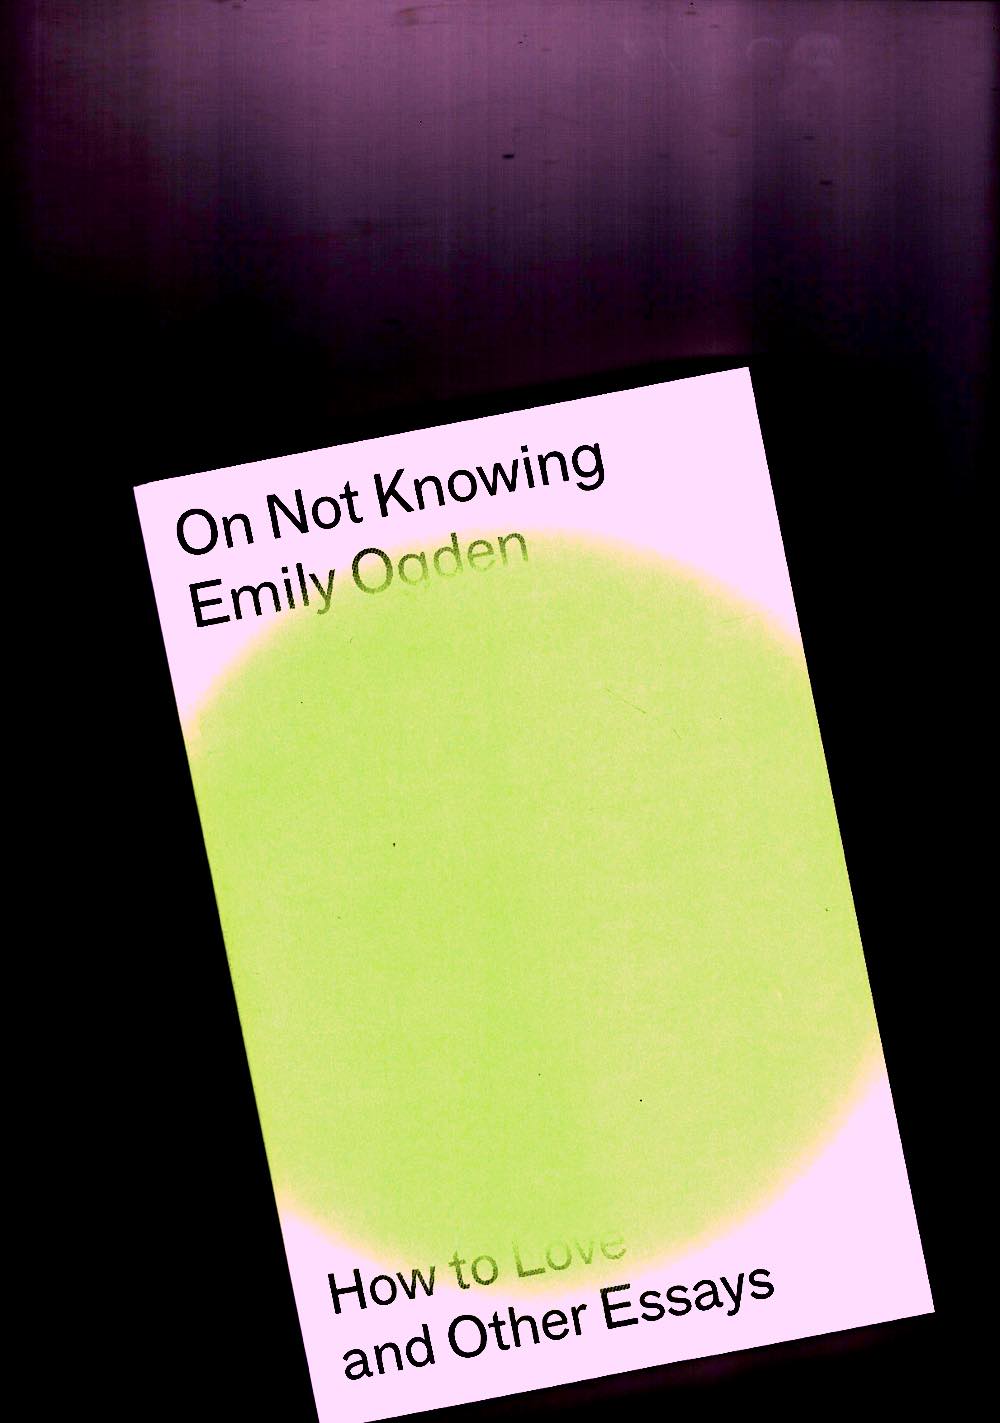 OGDEN, Emily - On Not Knowing